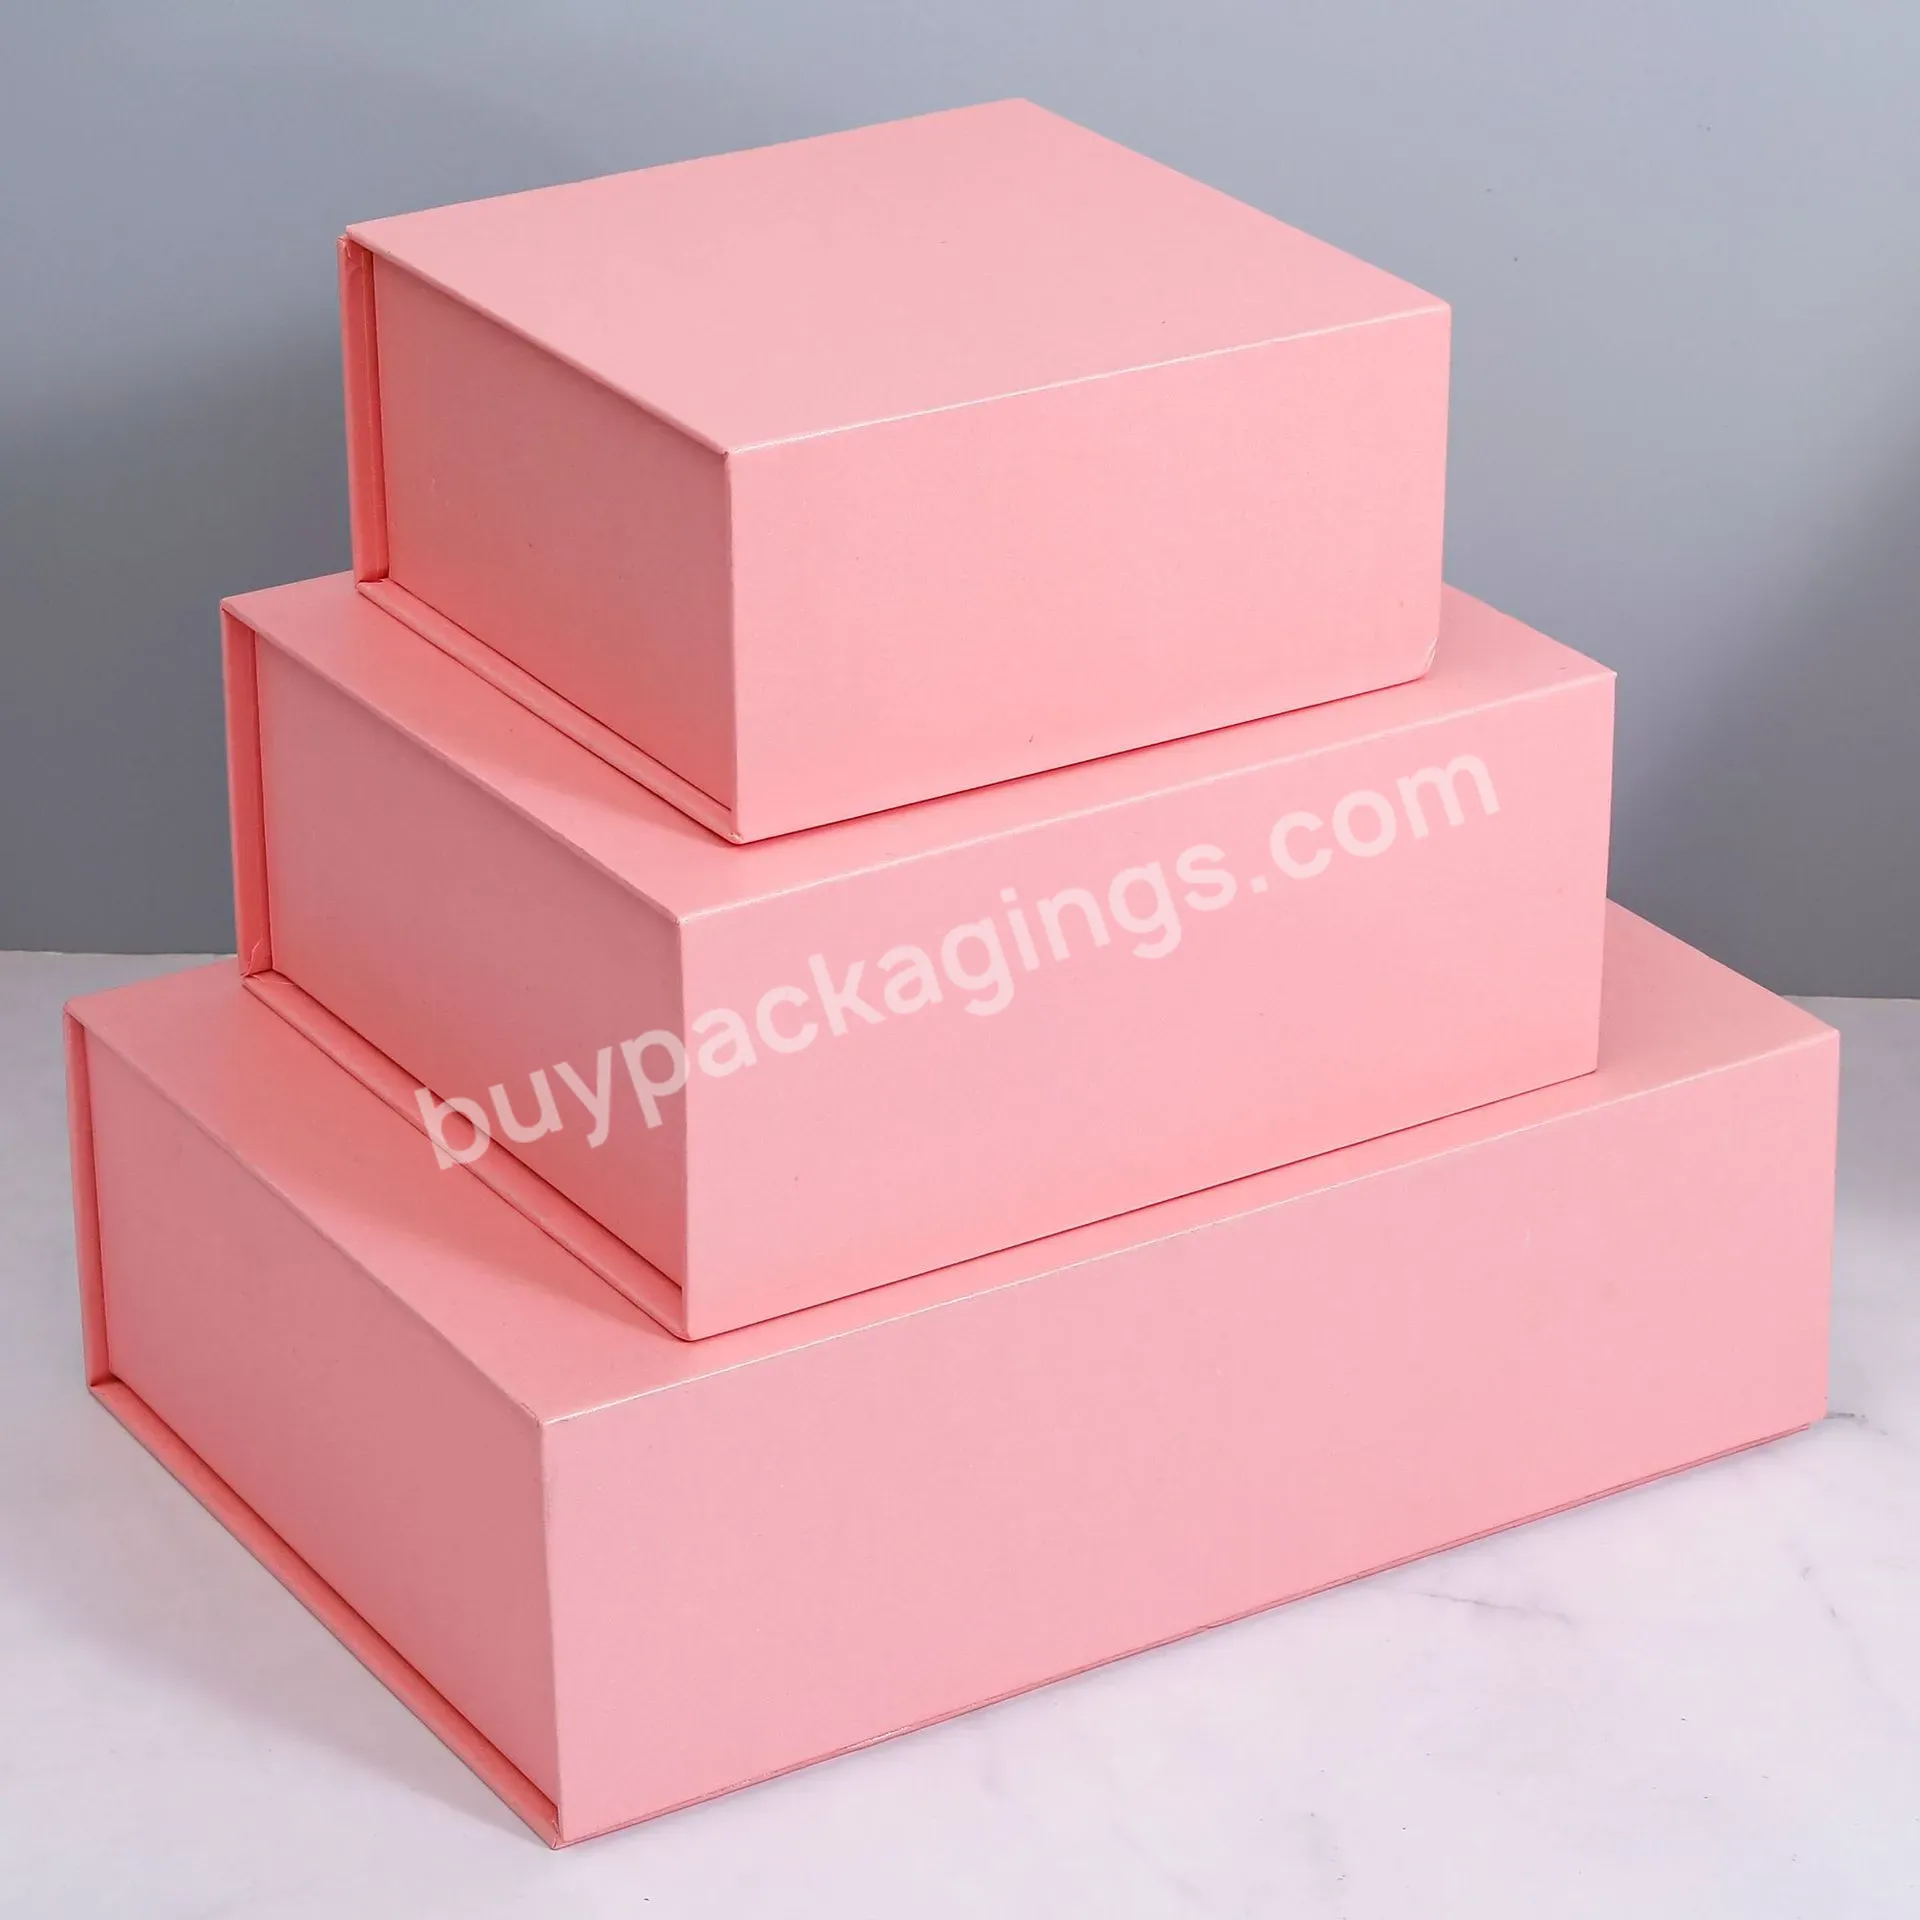 Folding Gift Box Business Gift-giving Packaging Box Square Cosmetic Box - Buy Large Gift Box,Gift Boxes For Presents Box With Lid White Box White Gift Box,White Gift Boxes Extra Large Gift Box Box For Gift Gift Box White Boxes.